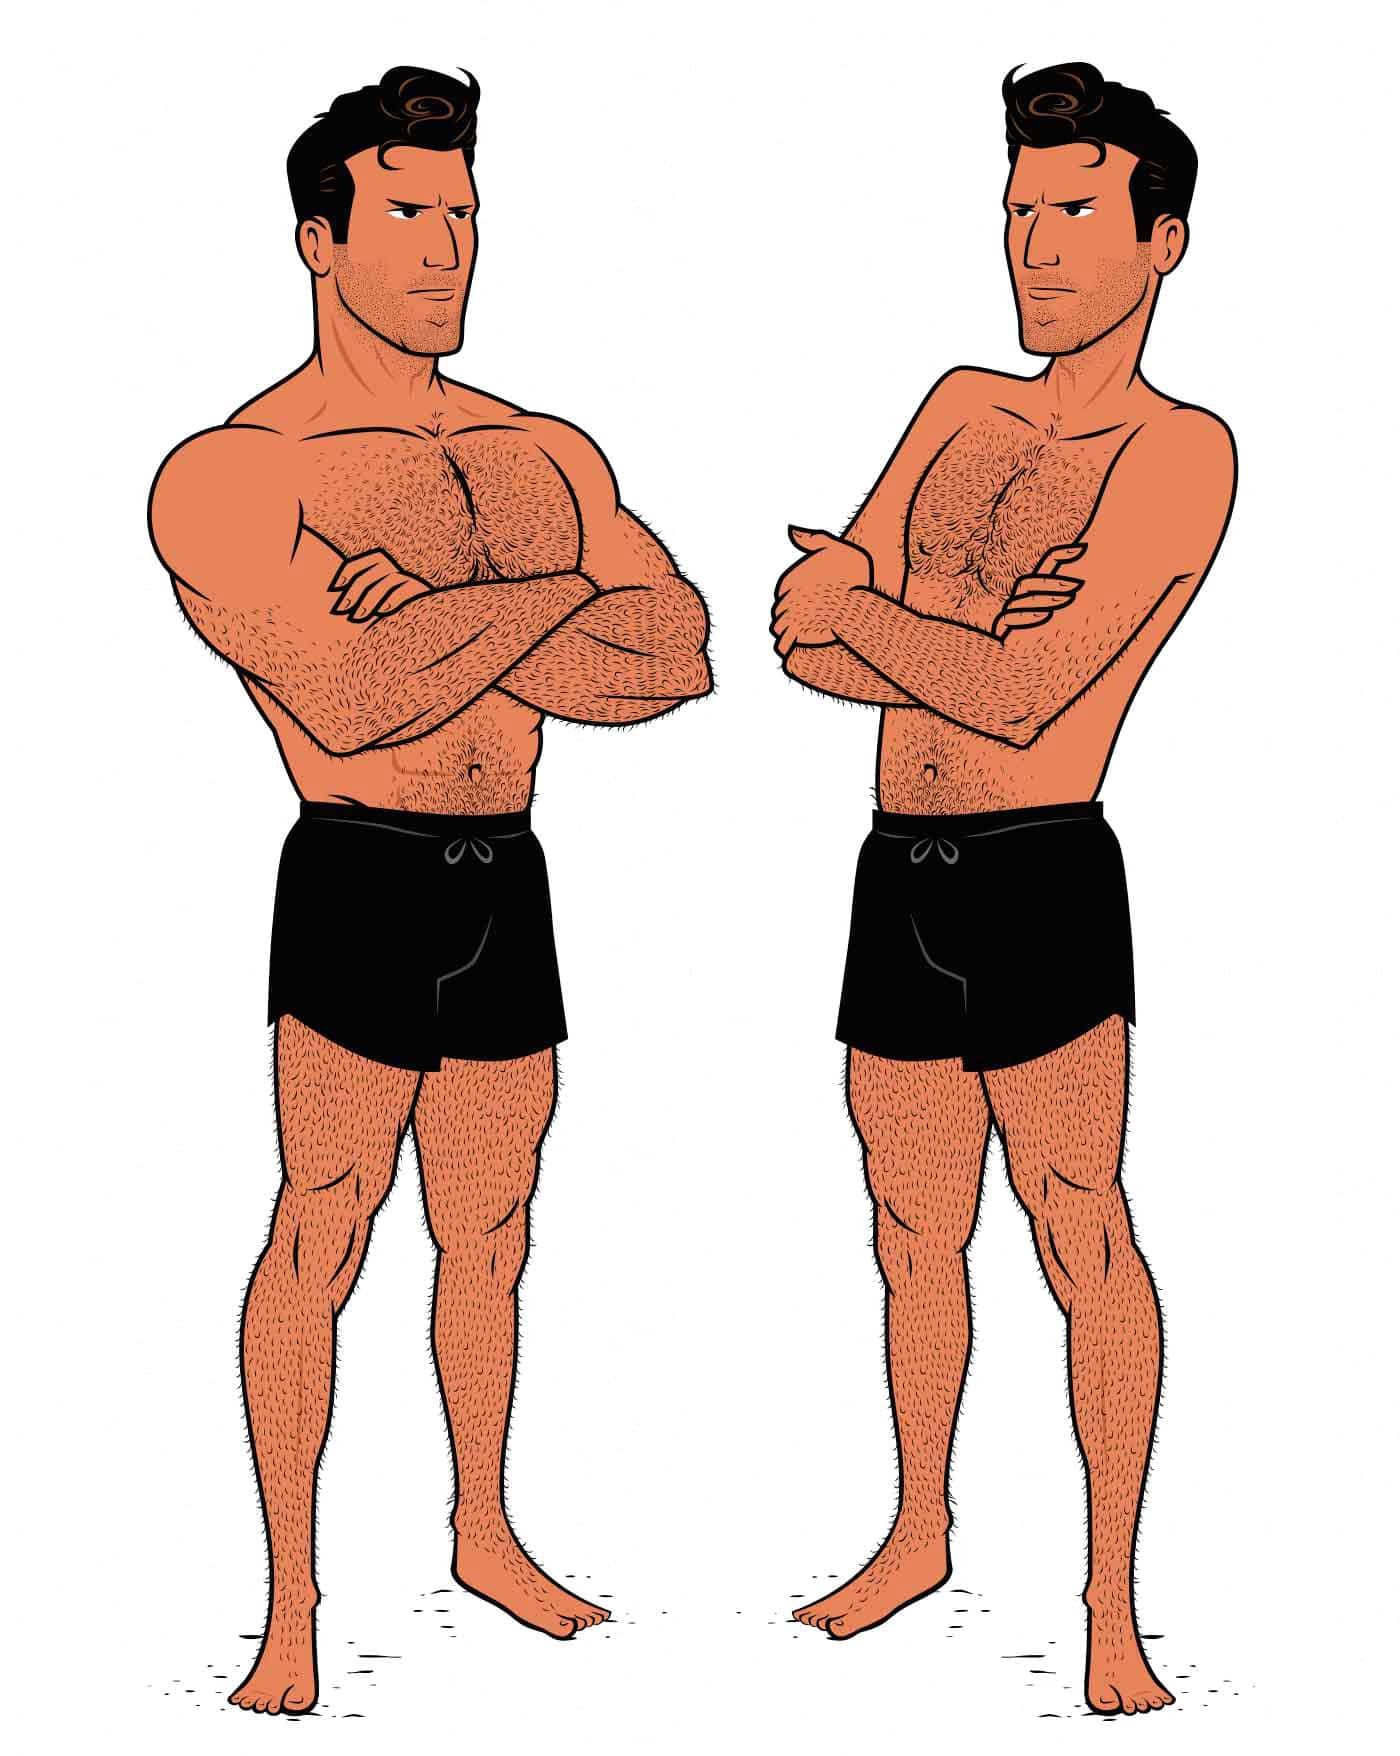 Illustration showing a lean, muscular bodybuilder and an athletic, healthy man.